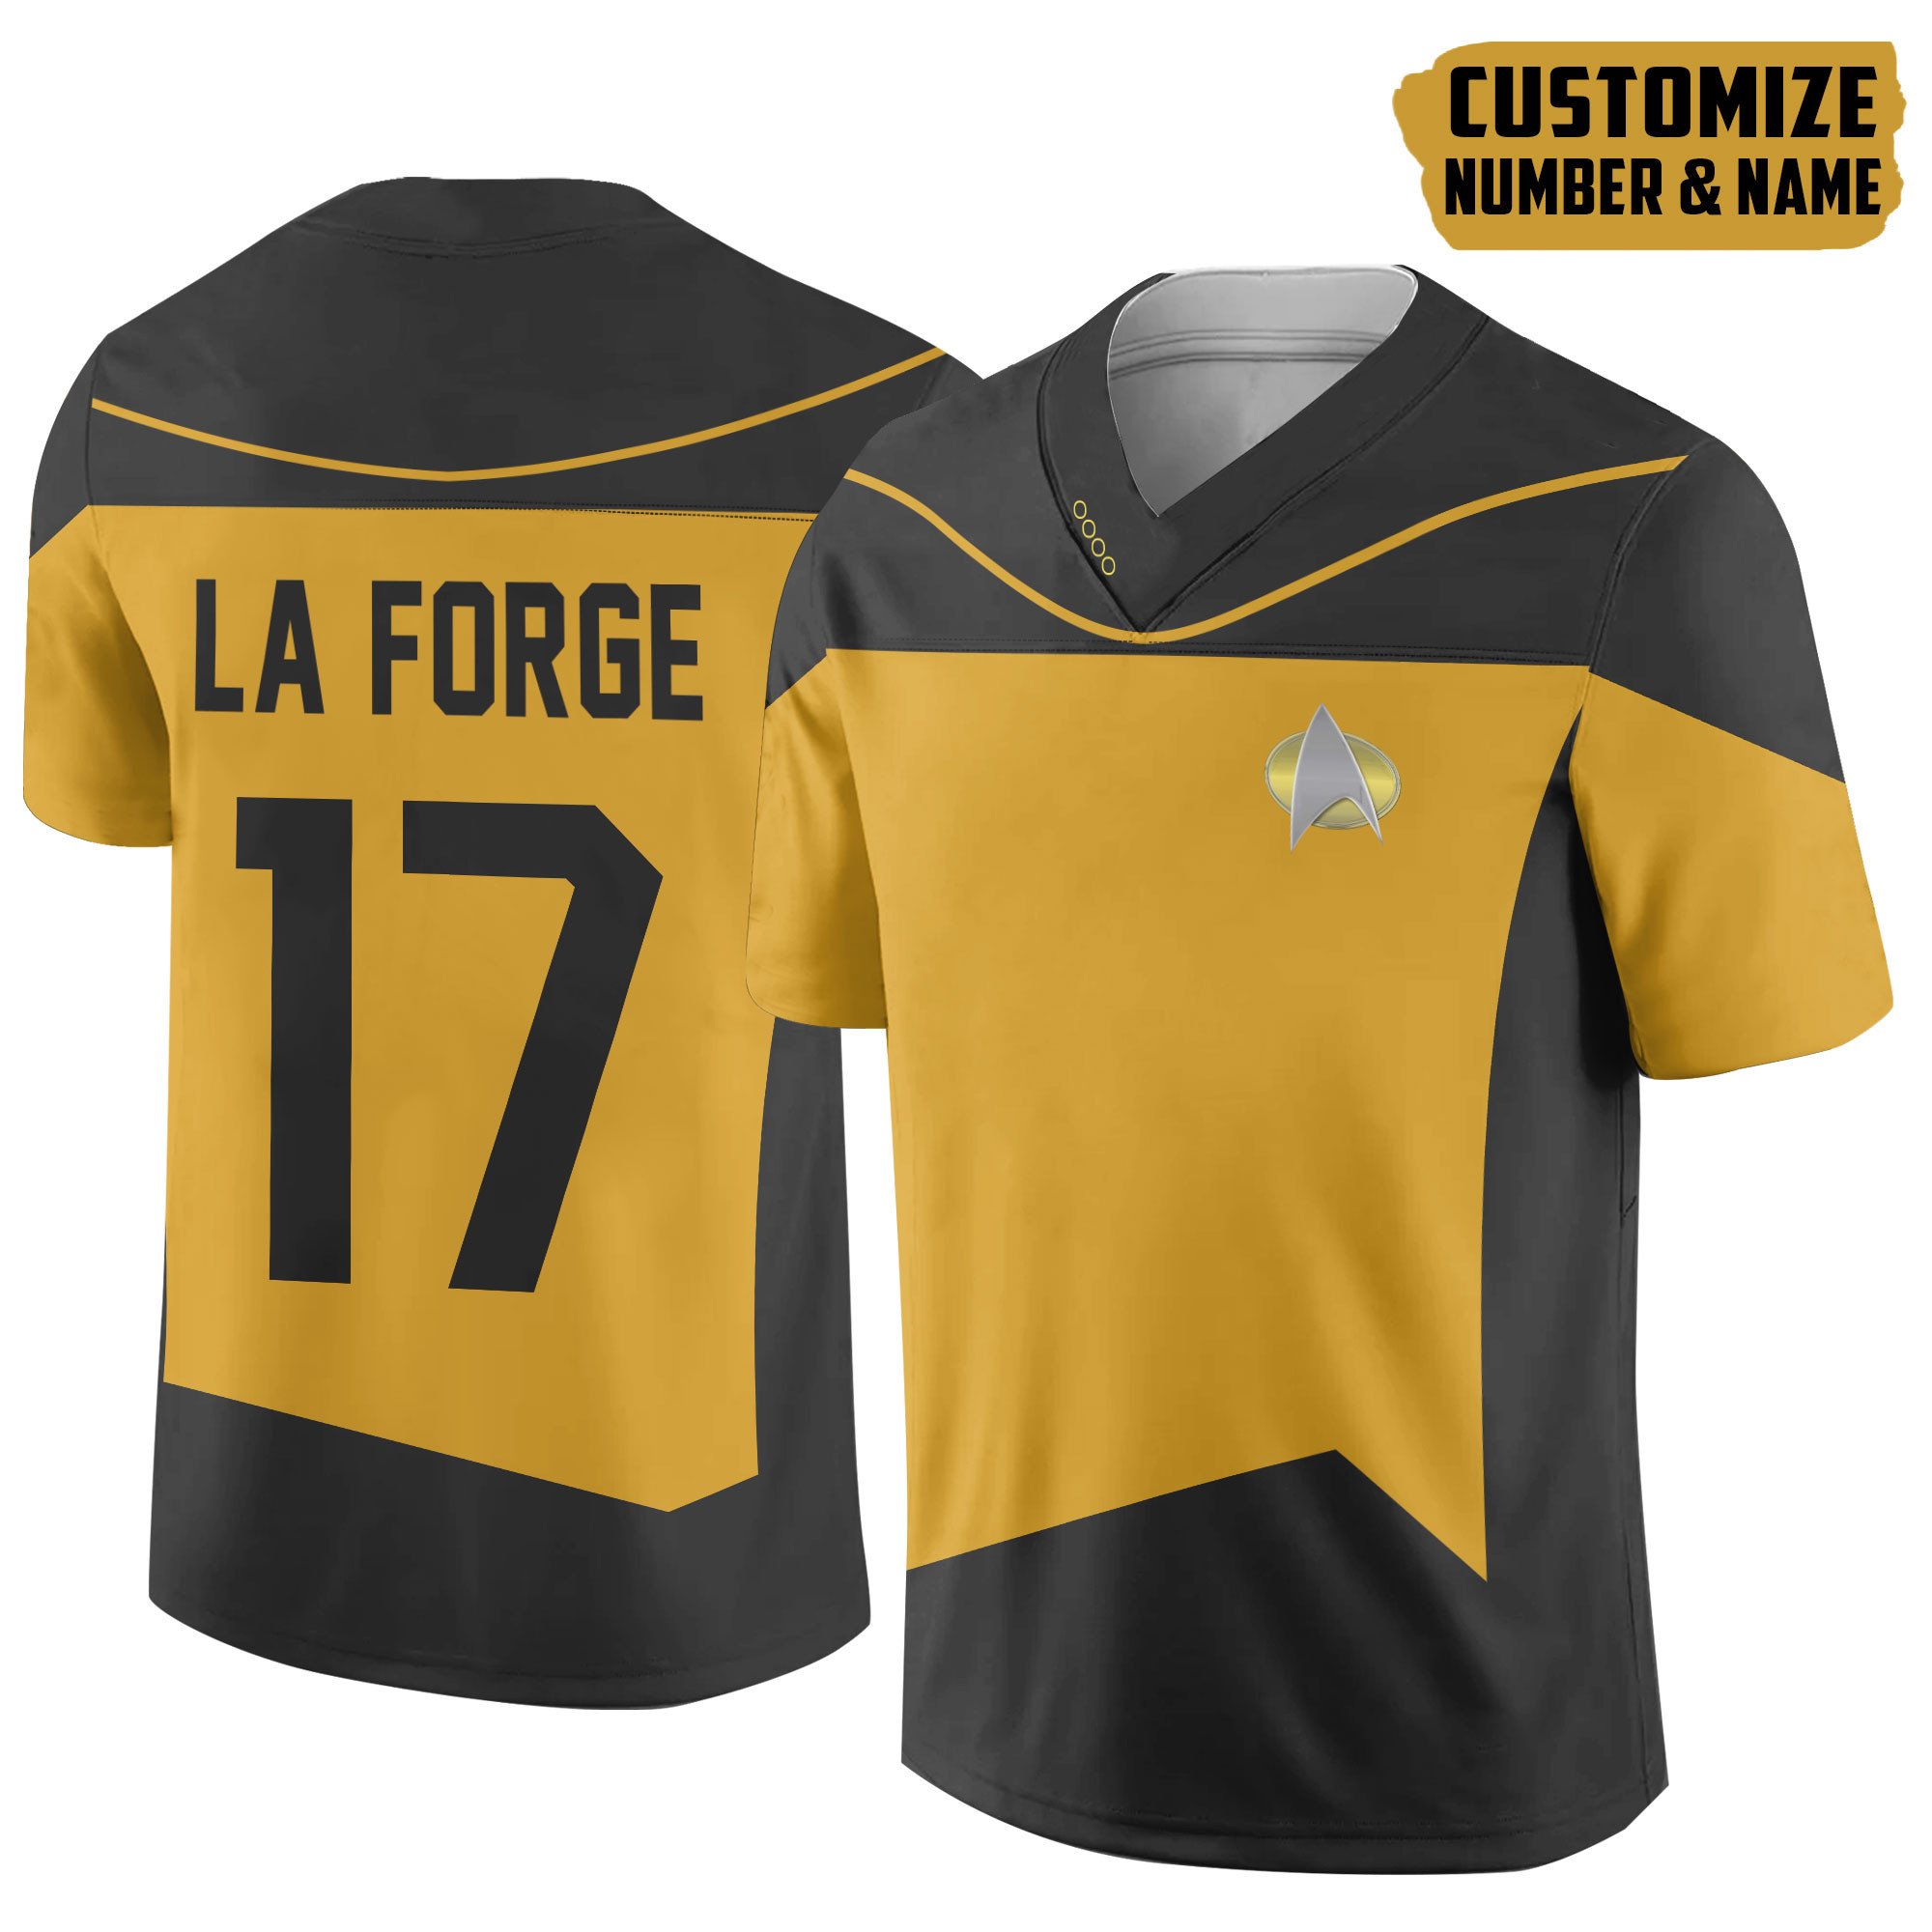 TOP S.T The Next Generation Yellow Version Personalized Custom Football All Over Print Jersey 3